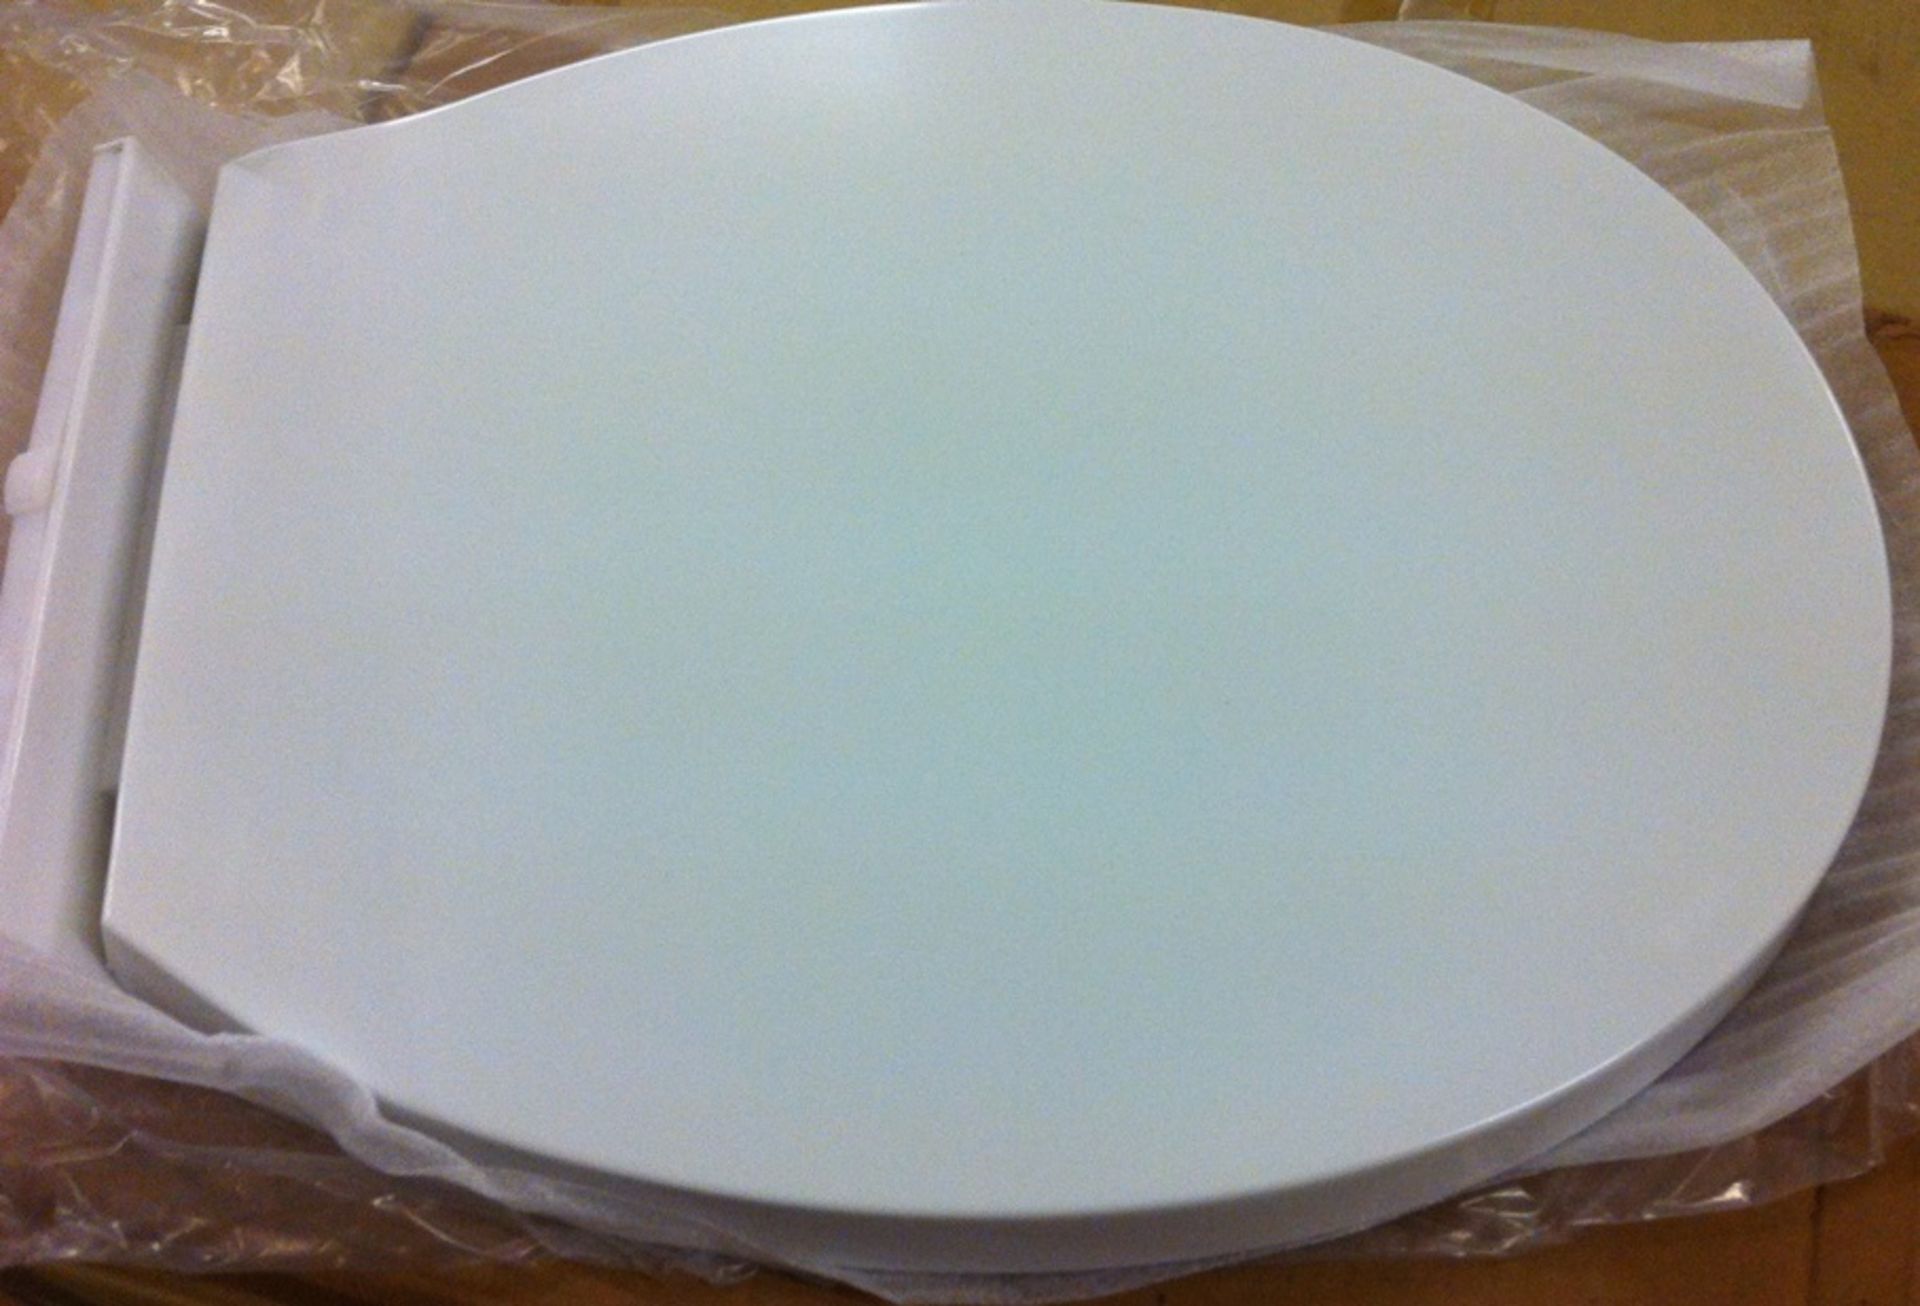 100 x Deluxe Soft Close White Toilet Seats - Brand New Boxed Stock - CL034 - Ideal For Resale - - Image 5 of 6